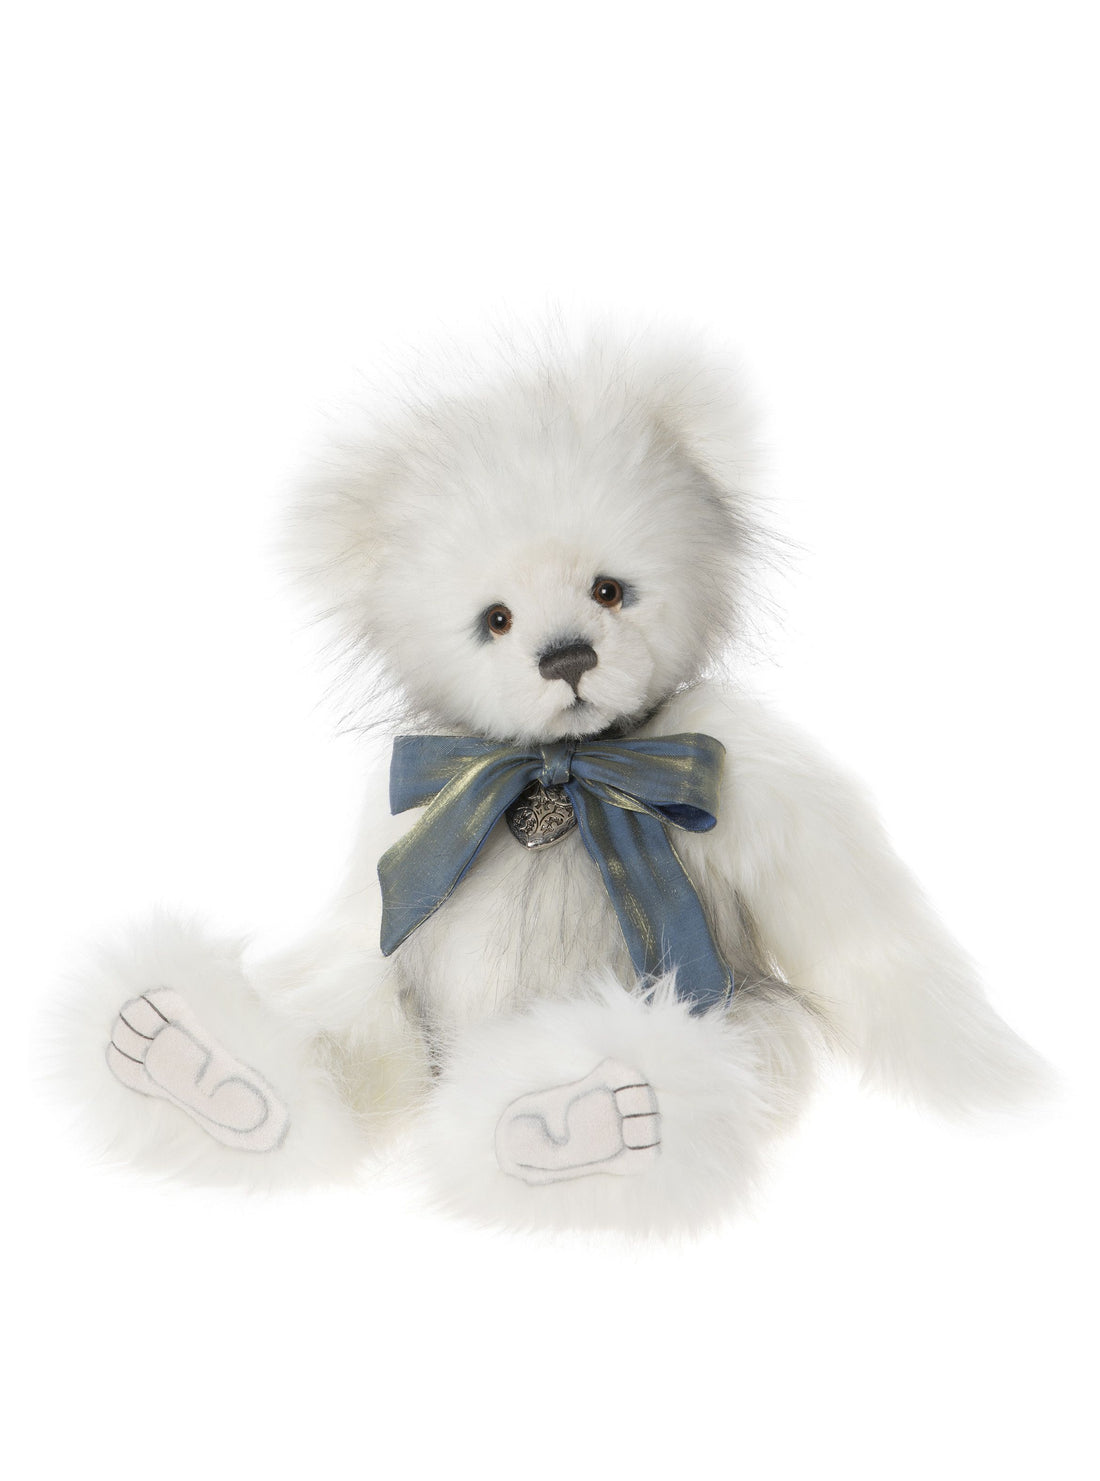 We are now Charlie bear stockists